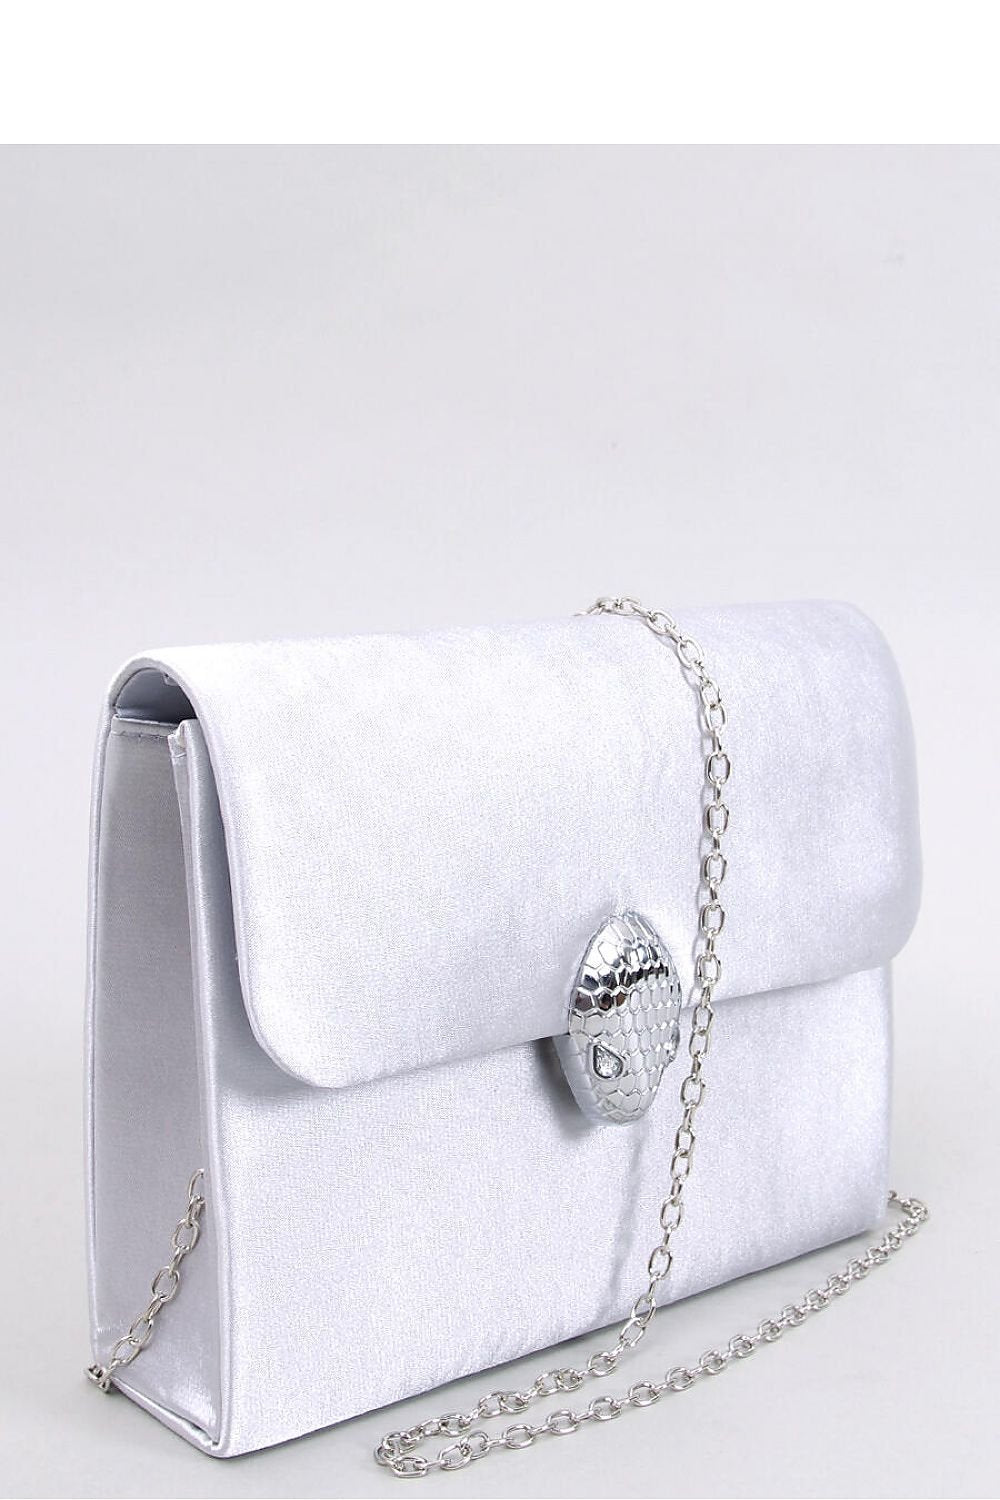 Evening handbag - M&H FashionEvening handbagM&H FashionM&H Fashion192444_1116836one-size-fits-allEvening handbag InelloM&H FashionM&H FashionVisitor clutch bag for women with a snake. This unique model with satin finish is sure to catch the eyes.... The handbag can be carried in hand or on a delicate chaiEvening handbag